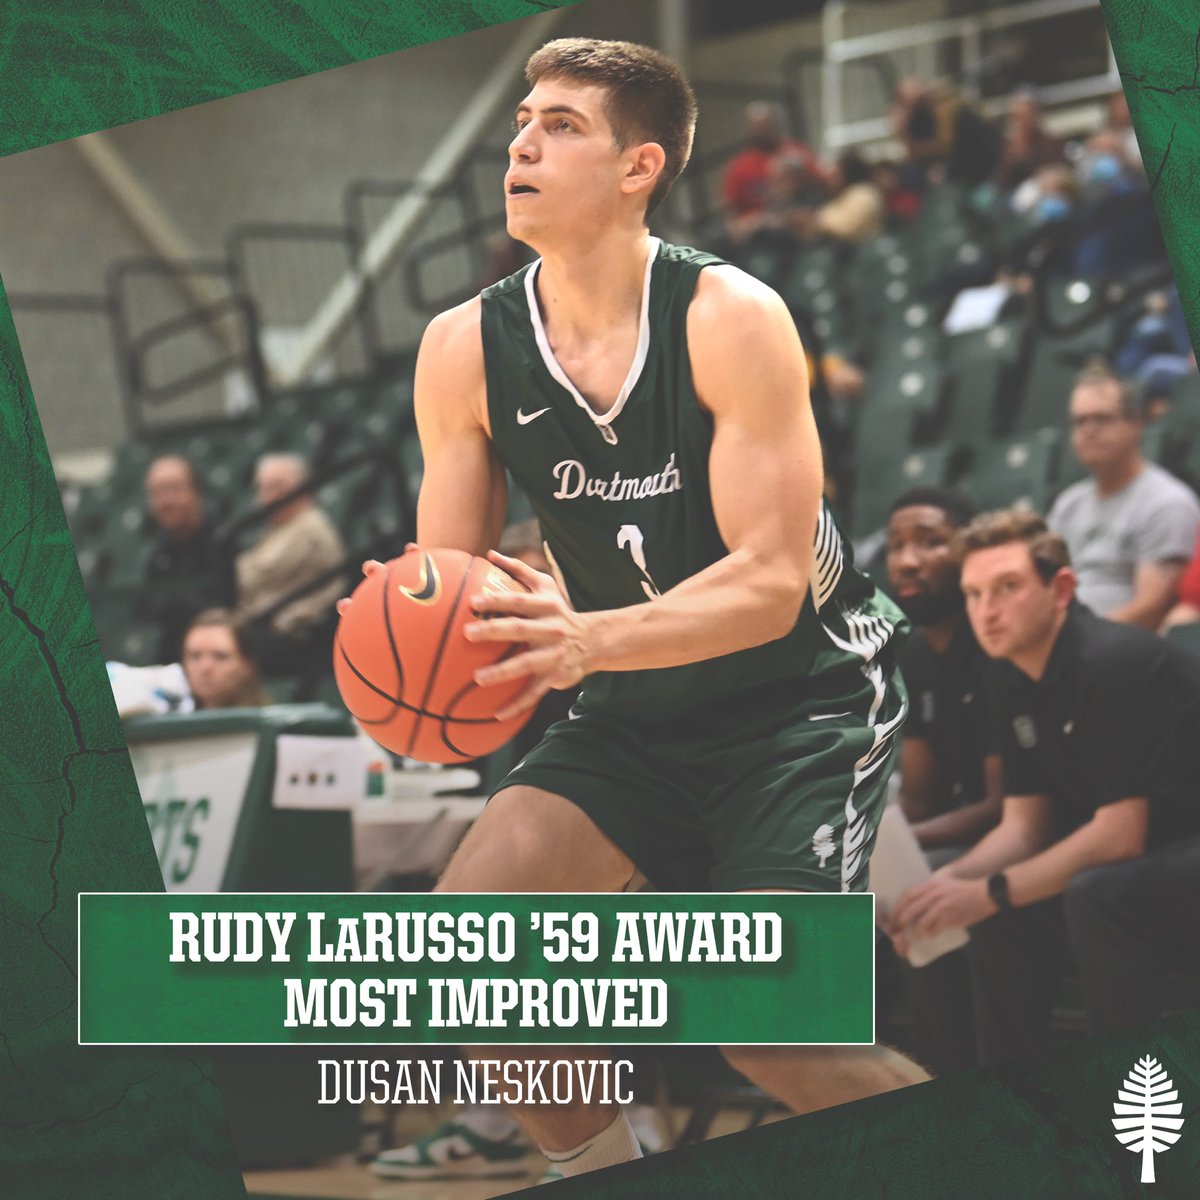 Congratulations to Dusan Neskovic, who won the Rudy LaRusso ‘59 Award as our Most Improved Player 📈 #TheWoods🌲 | #GoBigGreen